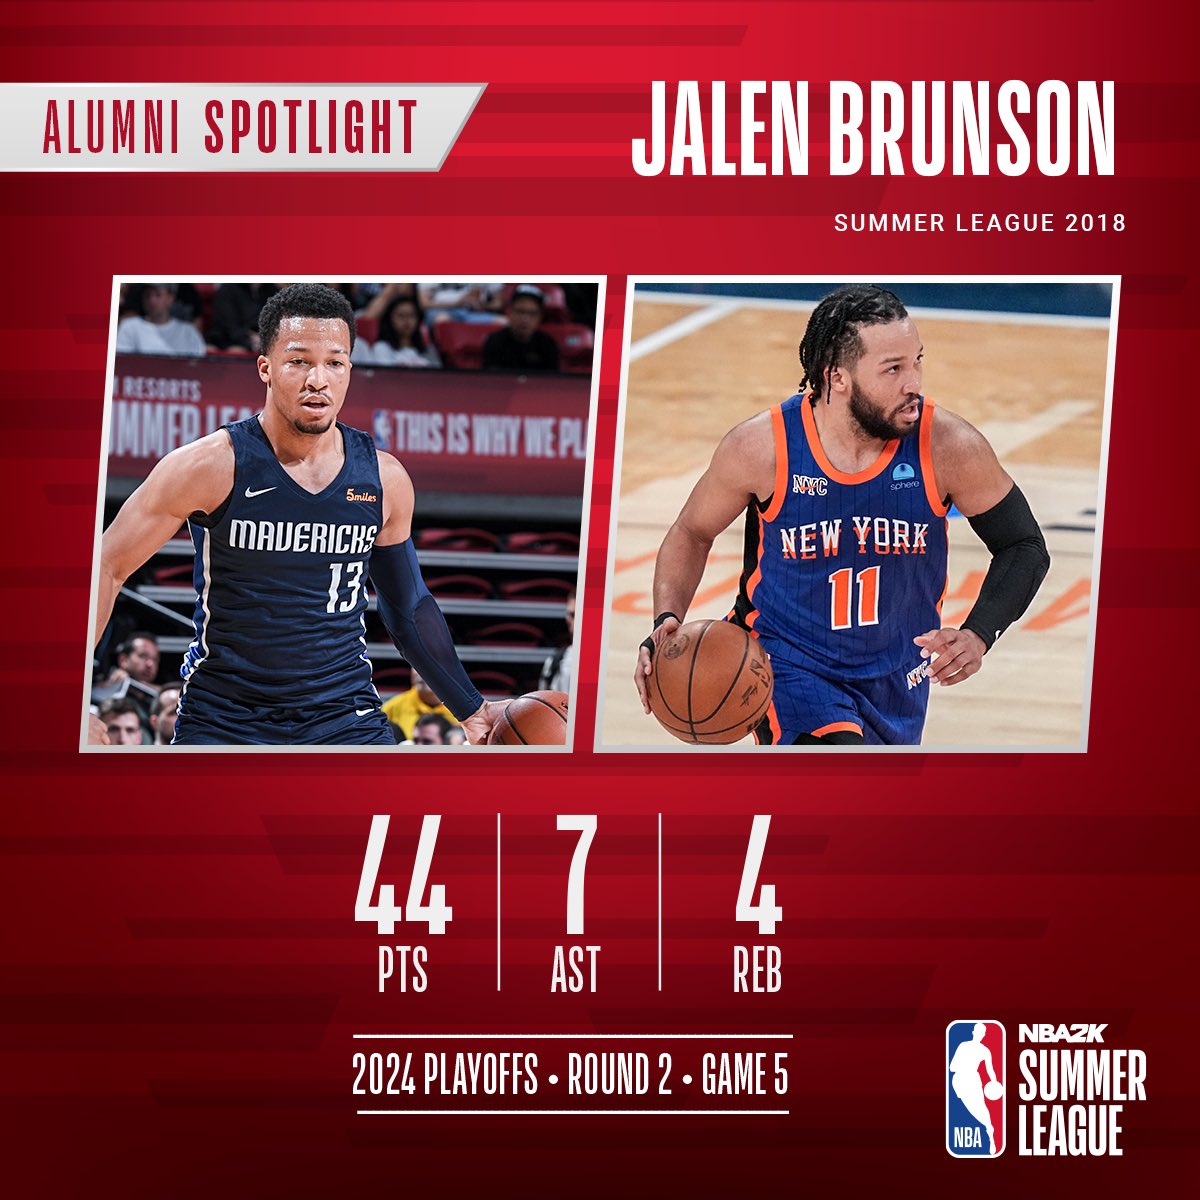 🔥 @jalenbrunson1 reached 40 for the fifth time in this postseason, and the Knicks beat the Indiana Pacers 121-91 for a 3-2 lead in their playoff series.

🎟️ NOW ON SALE for the #NBA2KSummerLeague taking place July 12-22 in Las Vegas.

Find out more here: NBAEvents.com